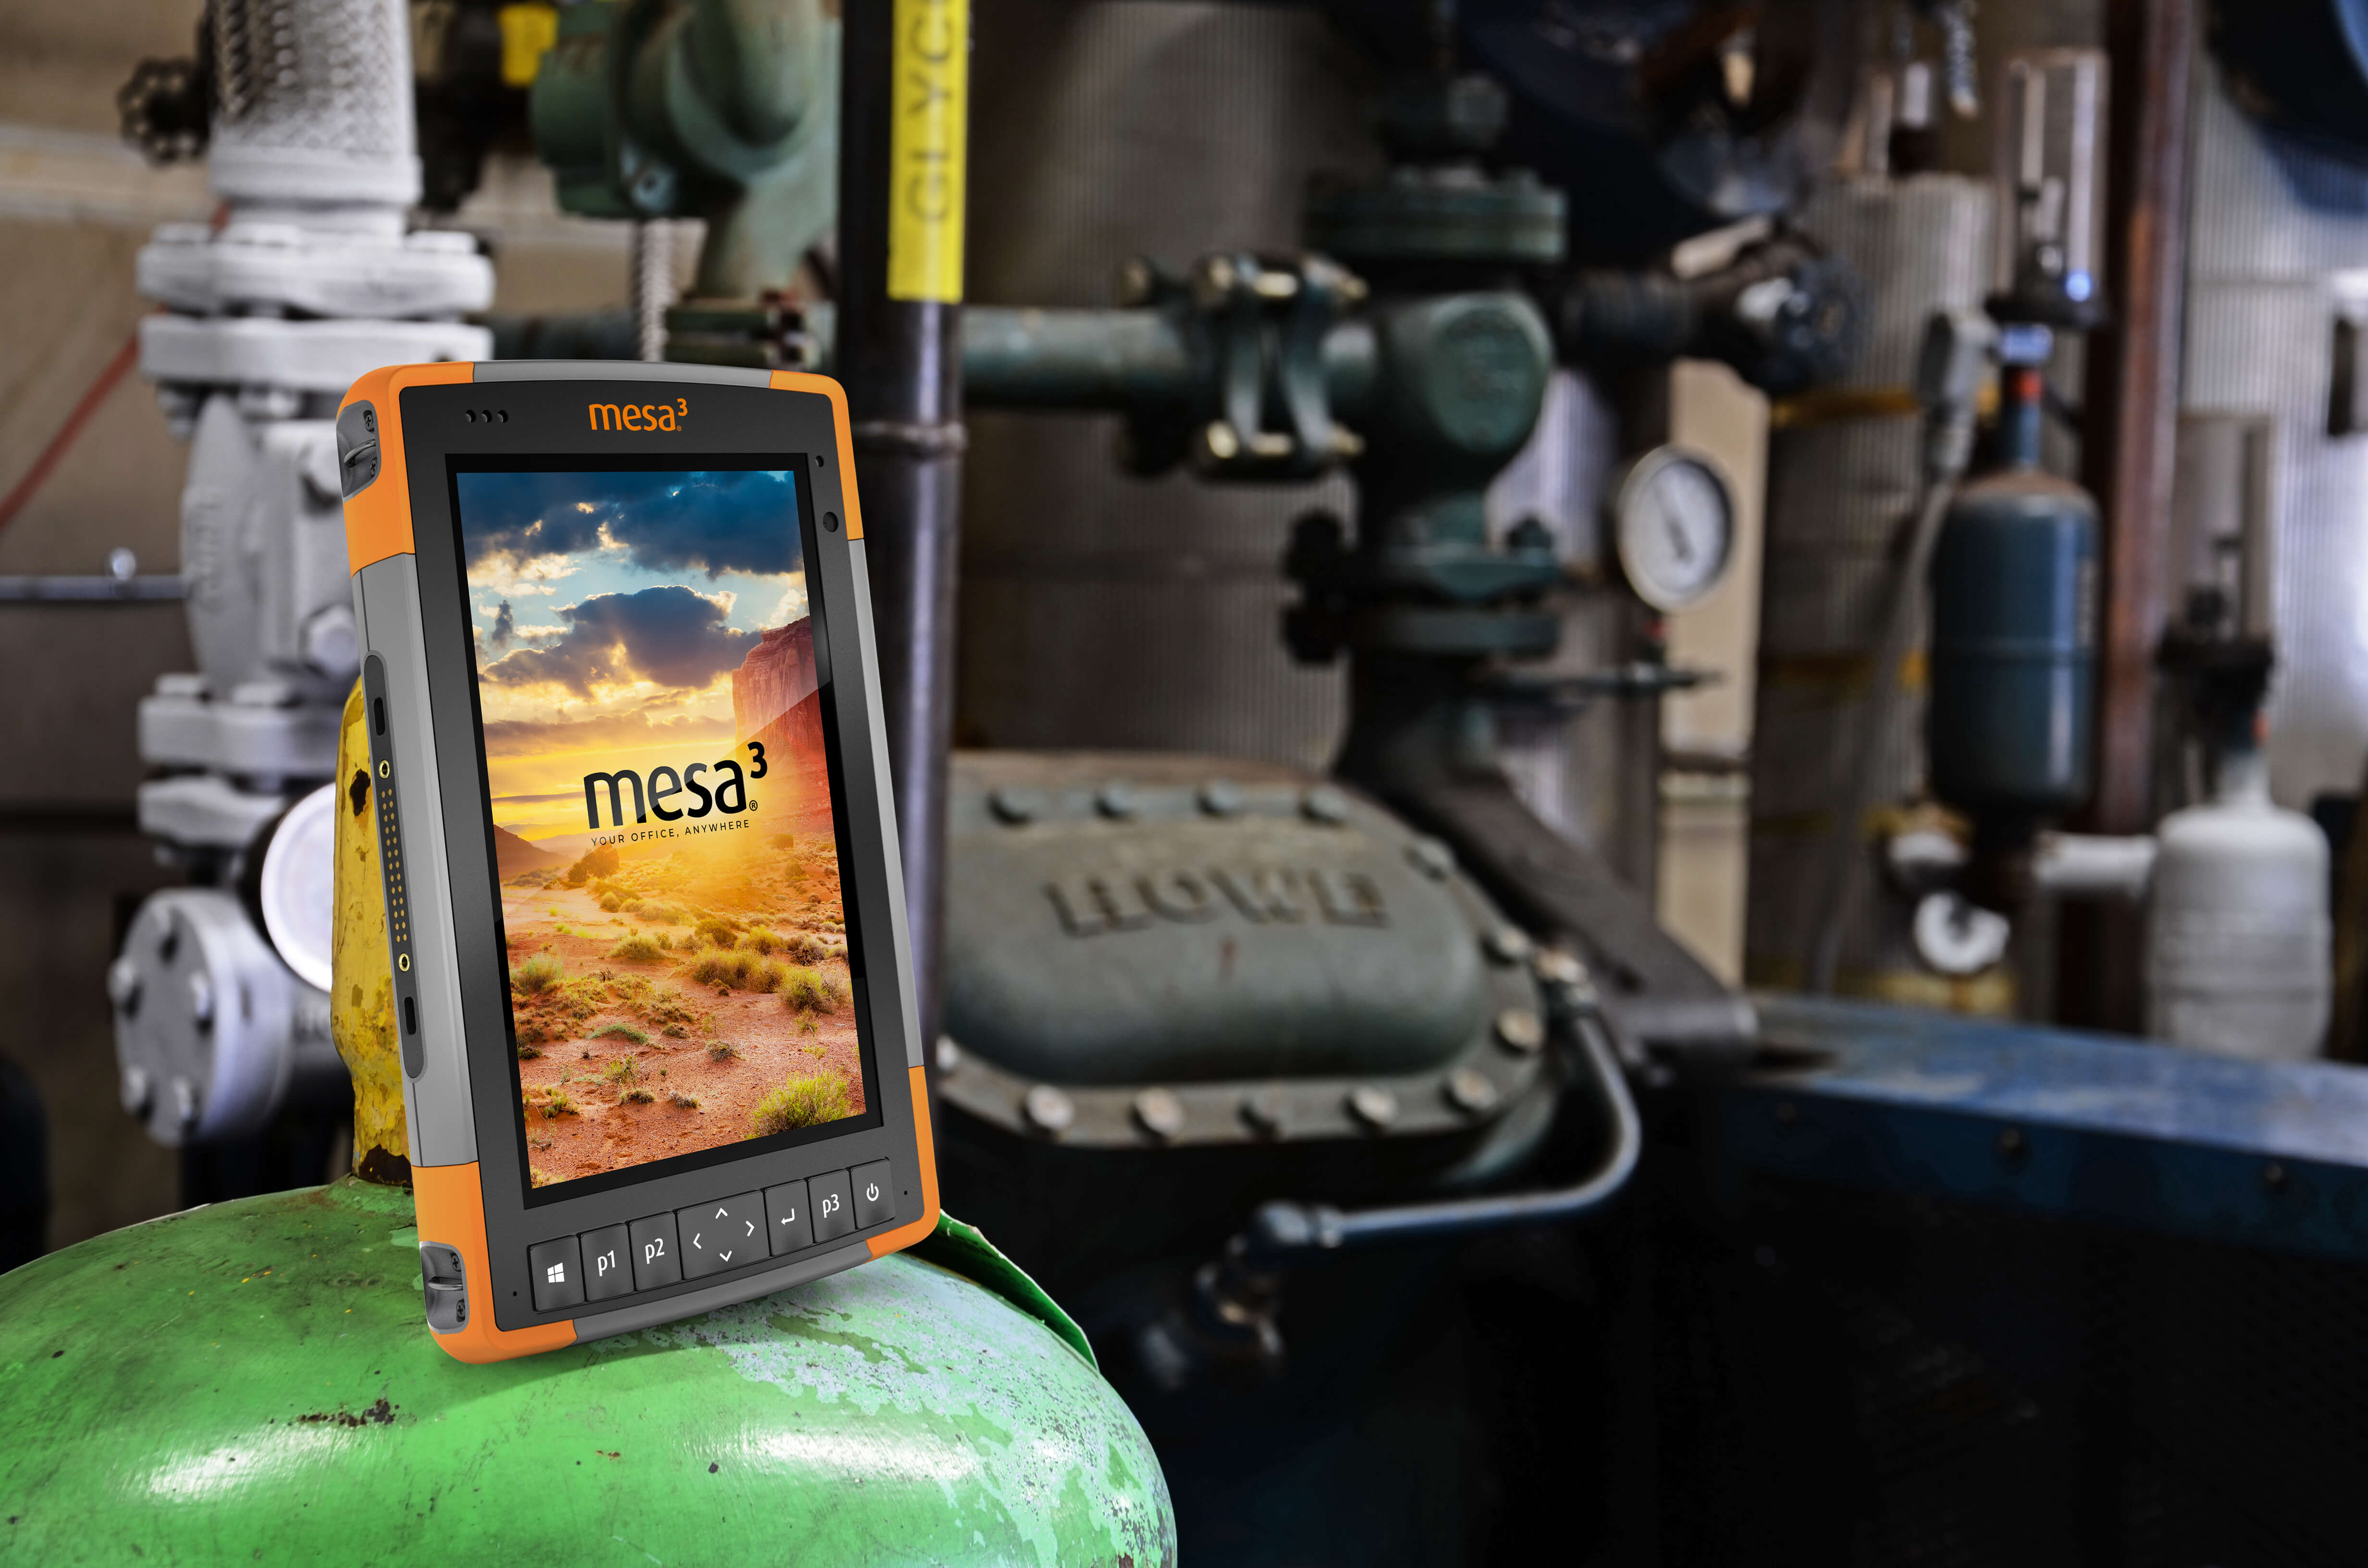 ﻿The Mesa 3 is now a hazardous location certified tablet